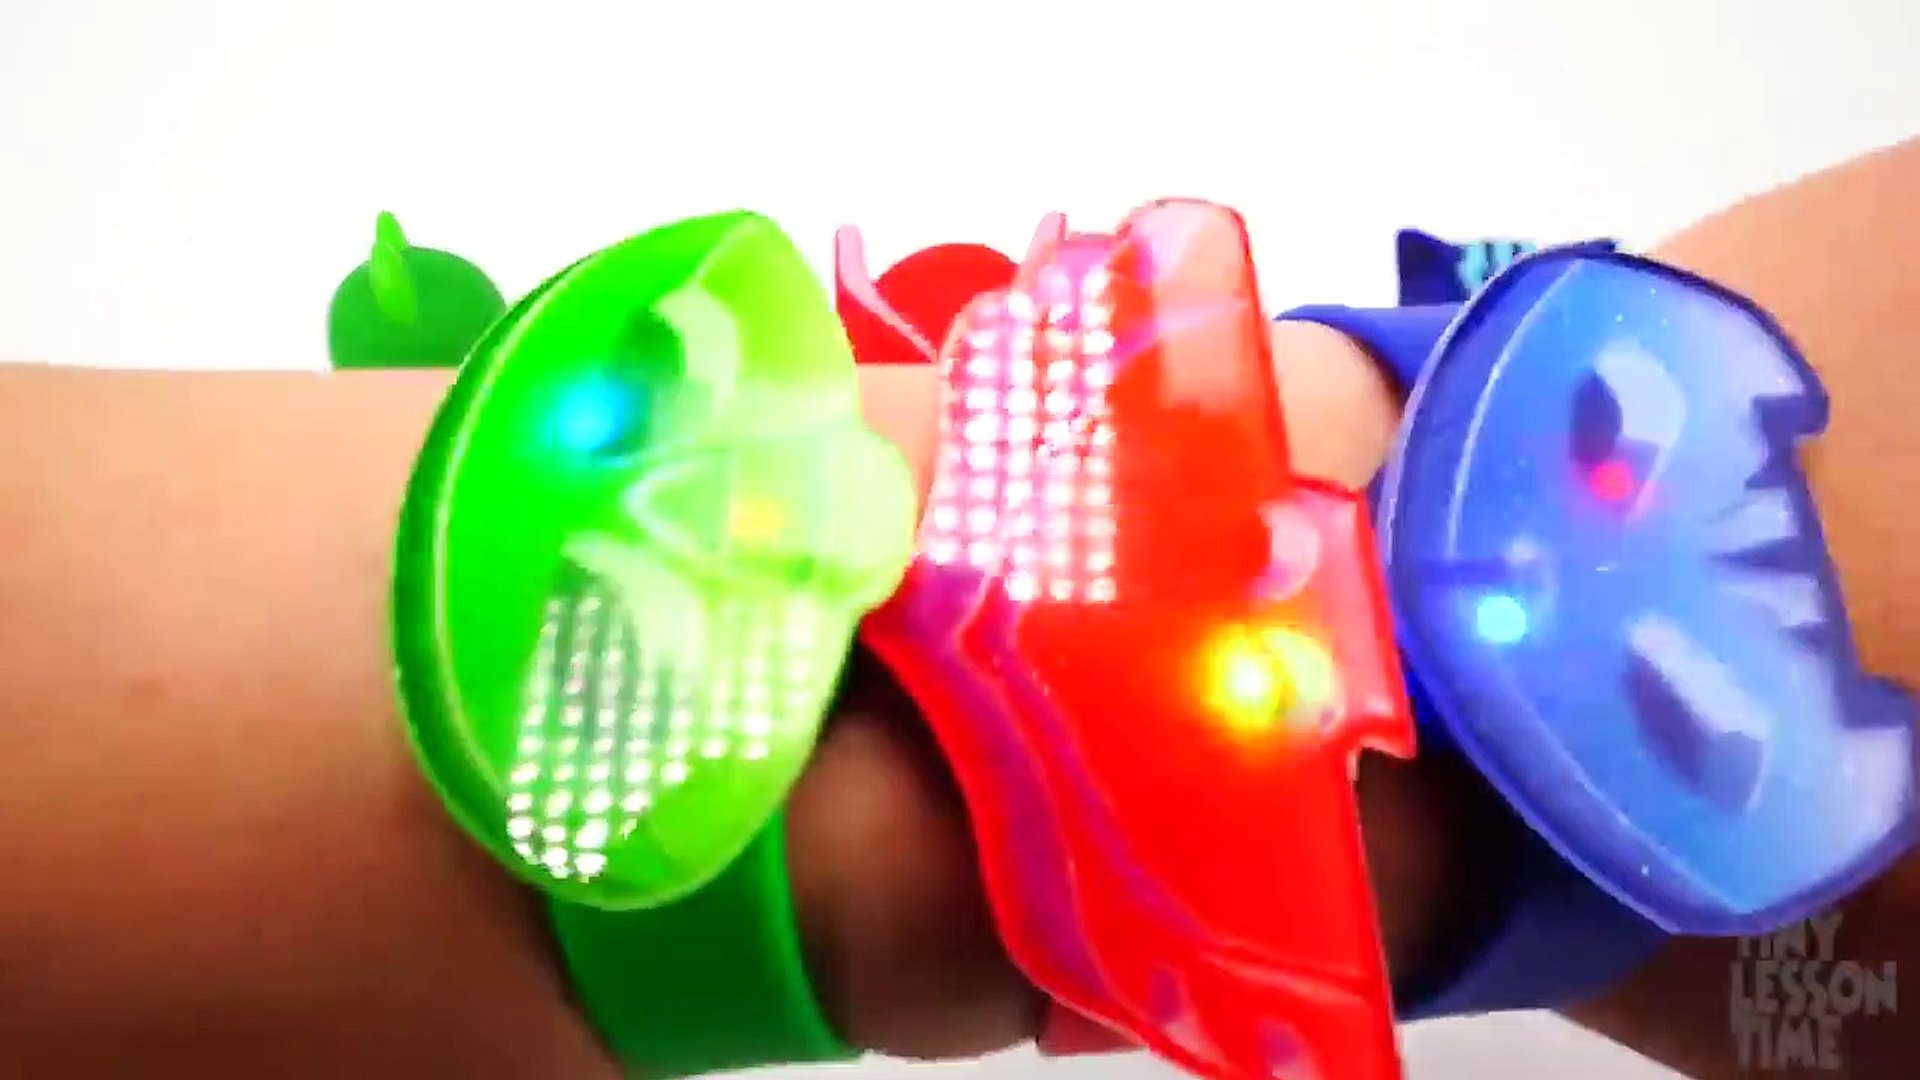 PJ Masks Wrong Heads and Matching Bracelets Toys - video Dailymotion